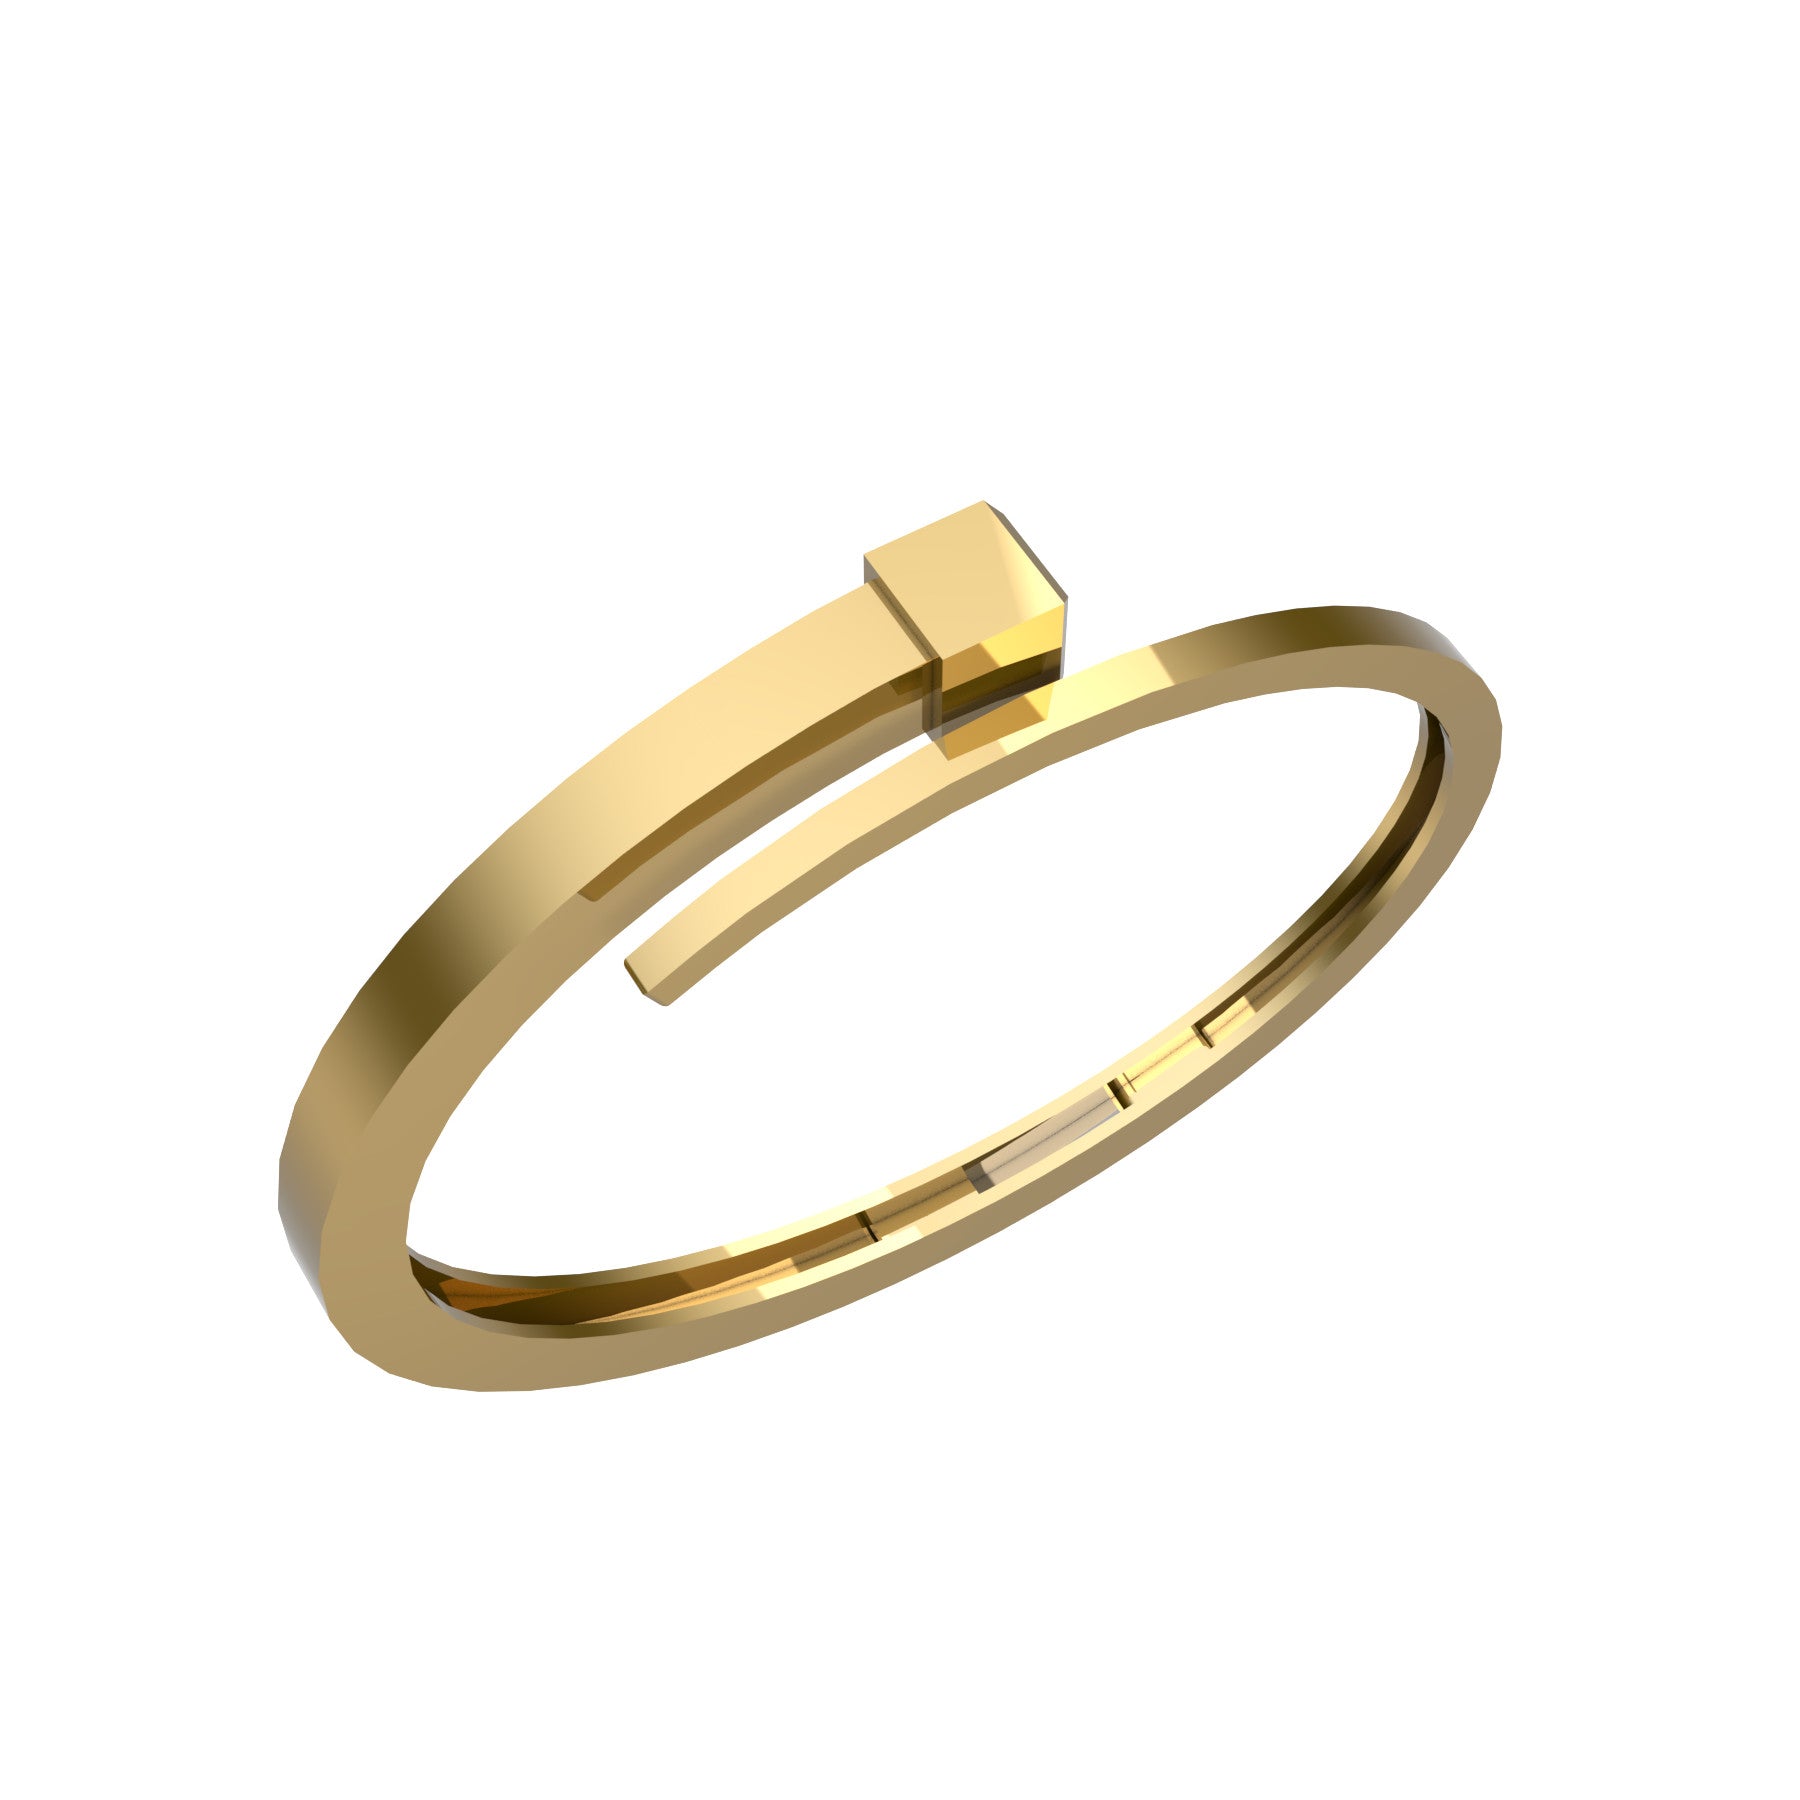 lucky nail bracelet, 18 K yellow gold, weight about 32,8 to 49,4 g (1.16 to 1.74 oz), width 8 mm max